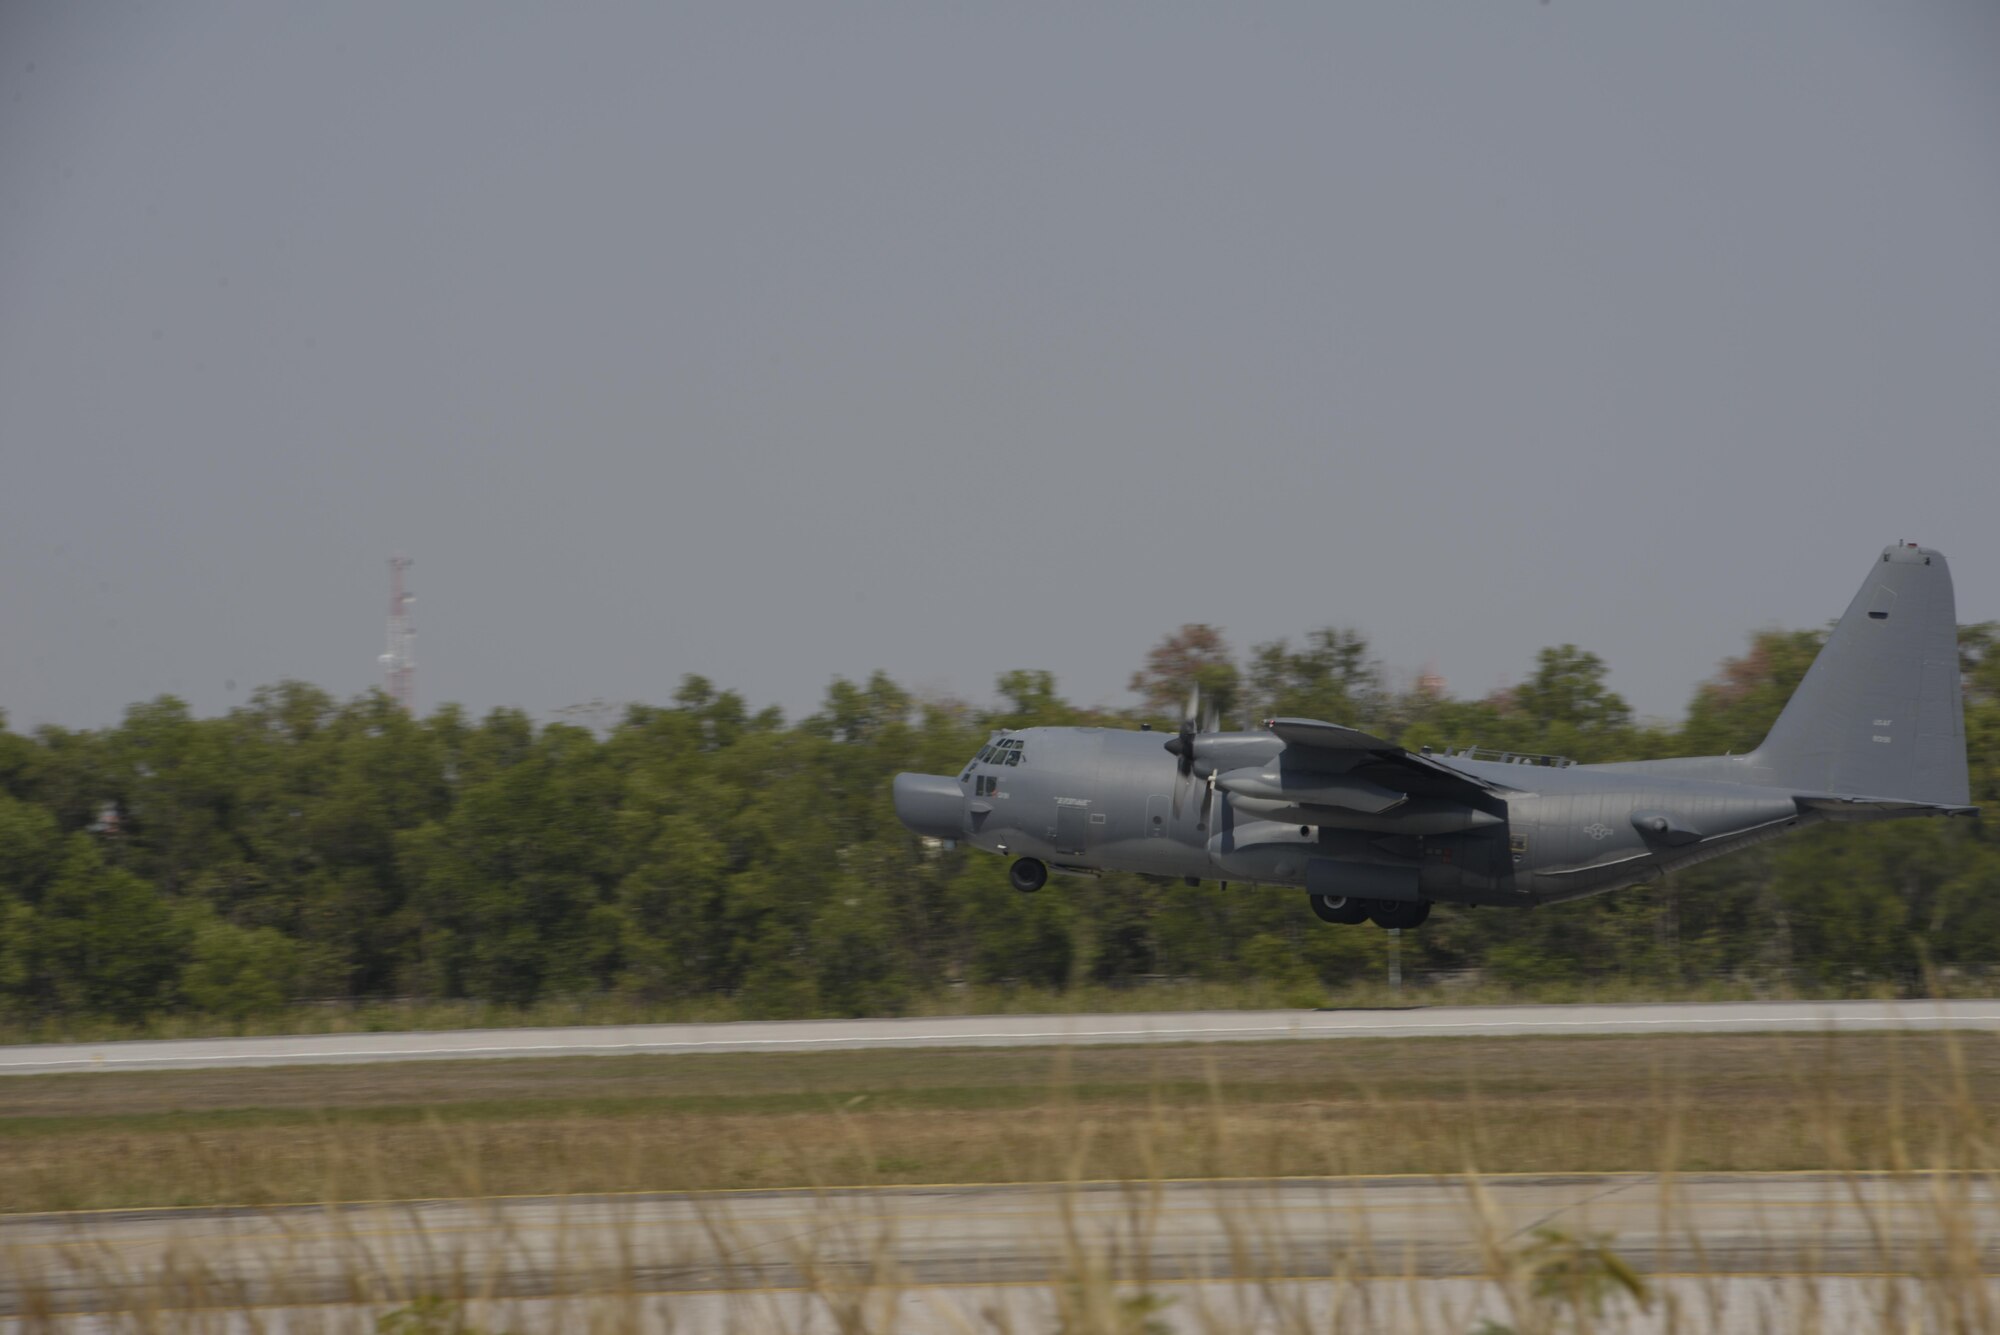 An MC-130H from the 1st Special Operations Squadron takes off during exercise Cobra Gold in Udon Thani, Thailand, Feb. 8, 2016. Cobra Gold 16 increases cooperation, interoperability and collaboration among partner nations in order to achieve effective solutions to common challenges as well as providing a venue for both United States and all partner nations to increase partner capacity in planning and executing complex and realistic, combined task force operations. (U.S. Air Force photo by Senior Airman Stephen G. Eigel)